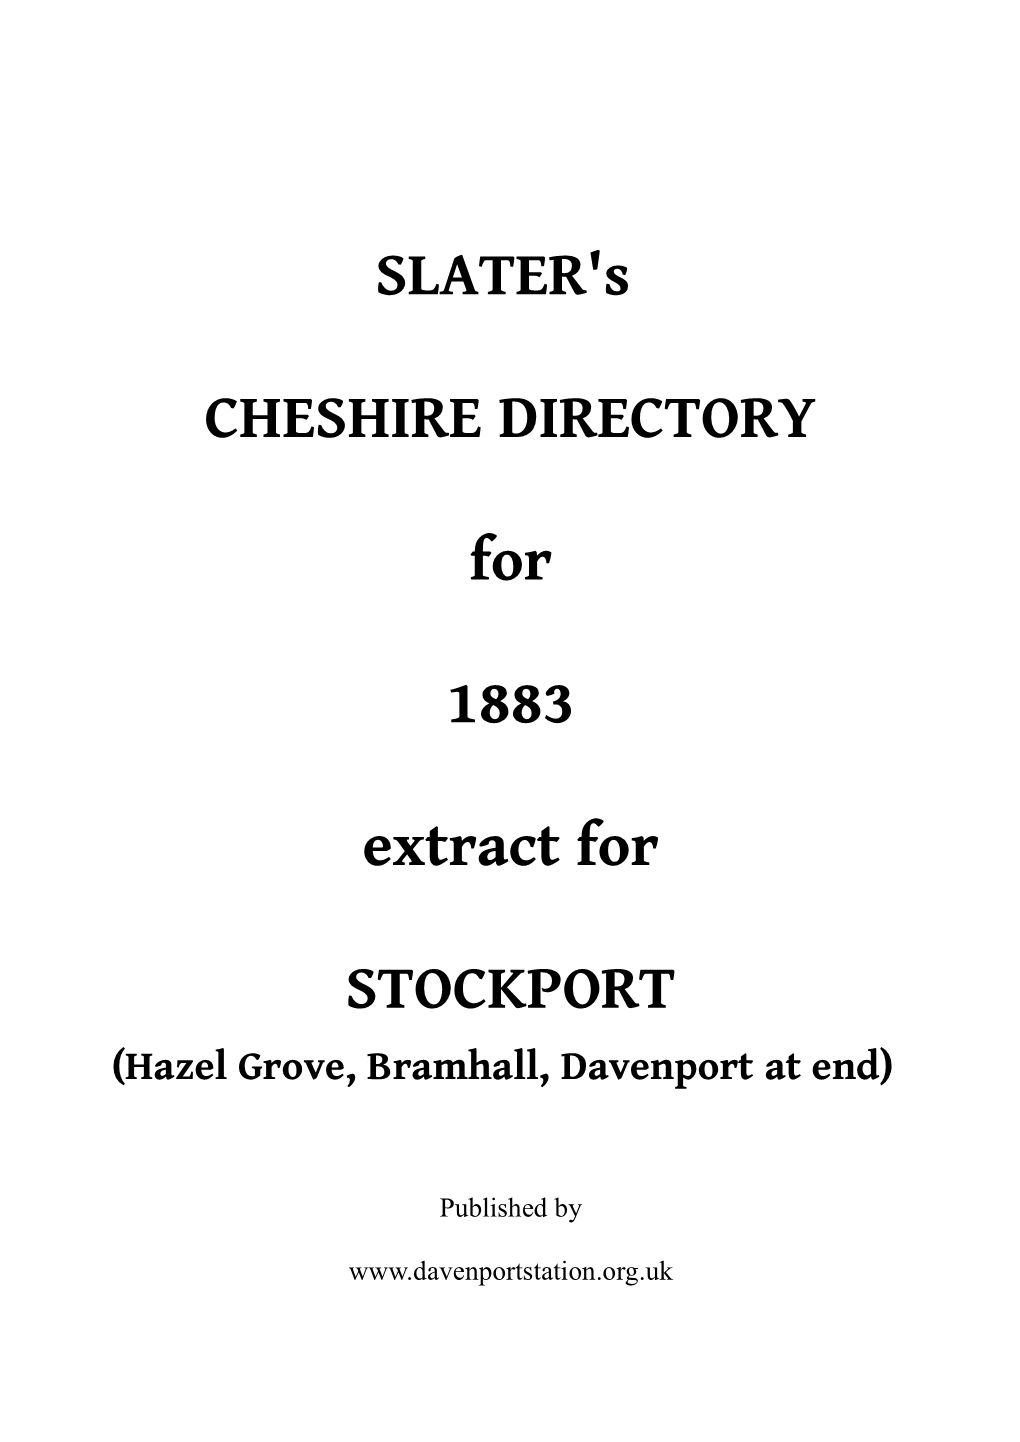 SLATER's CHESHIRE DIRECTORY for 1883 Extract for STOCKPORT